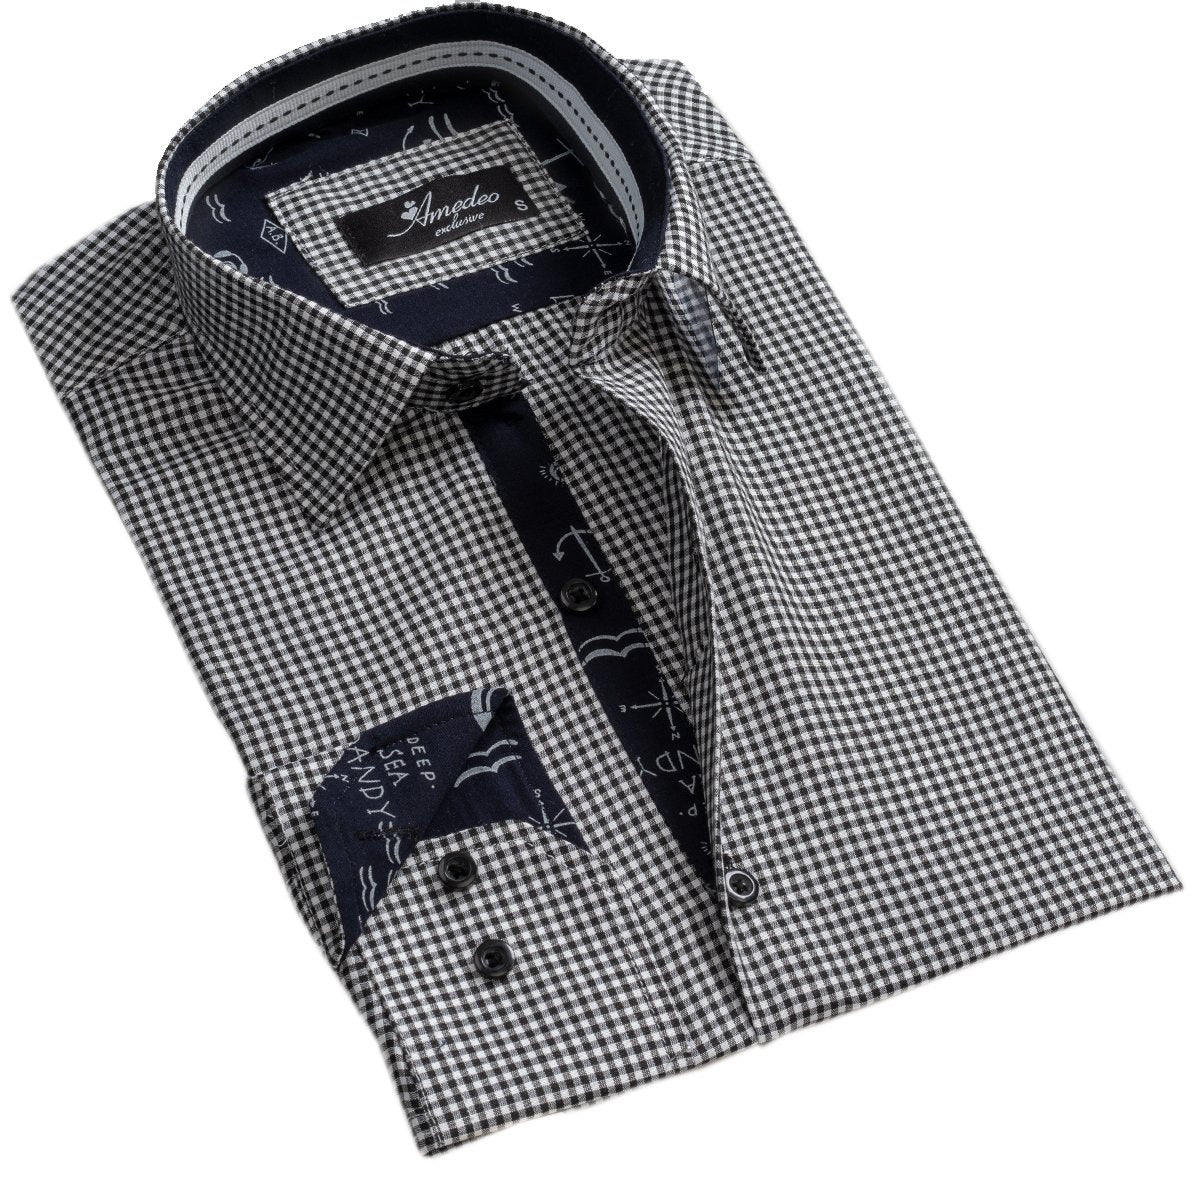 Black White Checkers Mens Slim Fit Designer Dress Shirt - tailored Cotton Shirts for Work and Casual Wear - Amedeo Exclusive